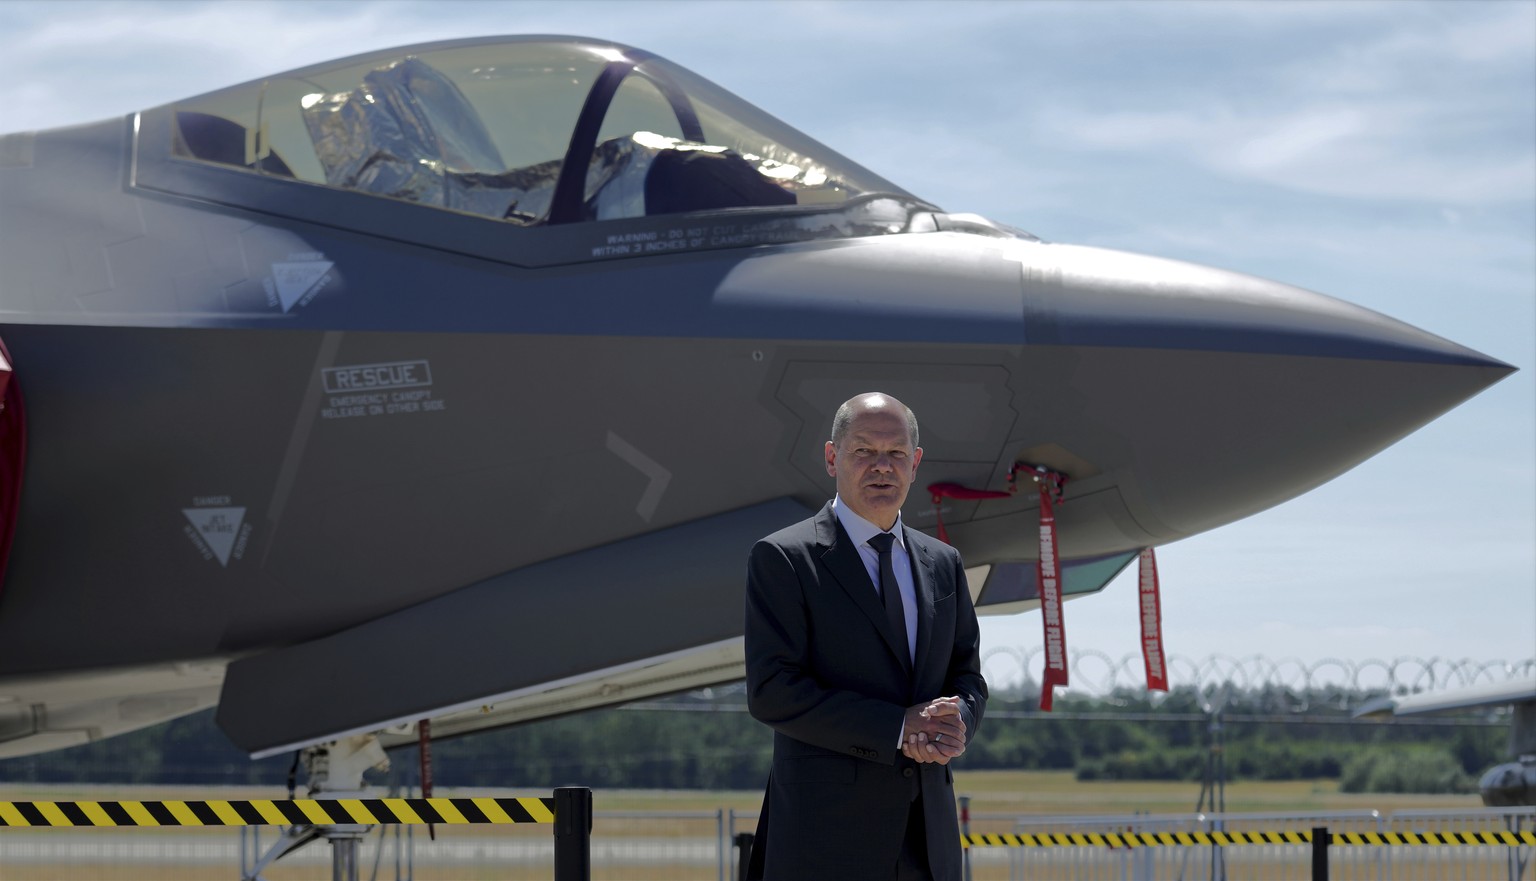 German Chancellor Olaf Scholz stands in front of a Lockheed Martin F-35 Lightning II airplaine during his visit at the ILA Berlin Air Show in Schoenefeld near Berlin, Germany, Wednesday, June 22, 2022 ...